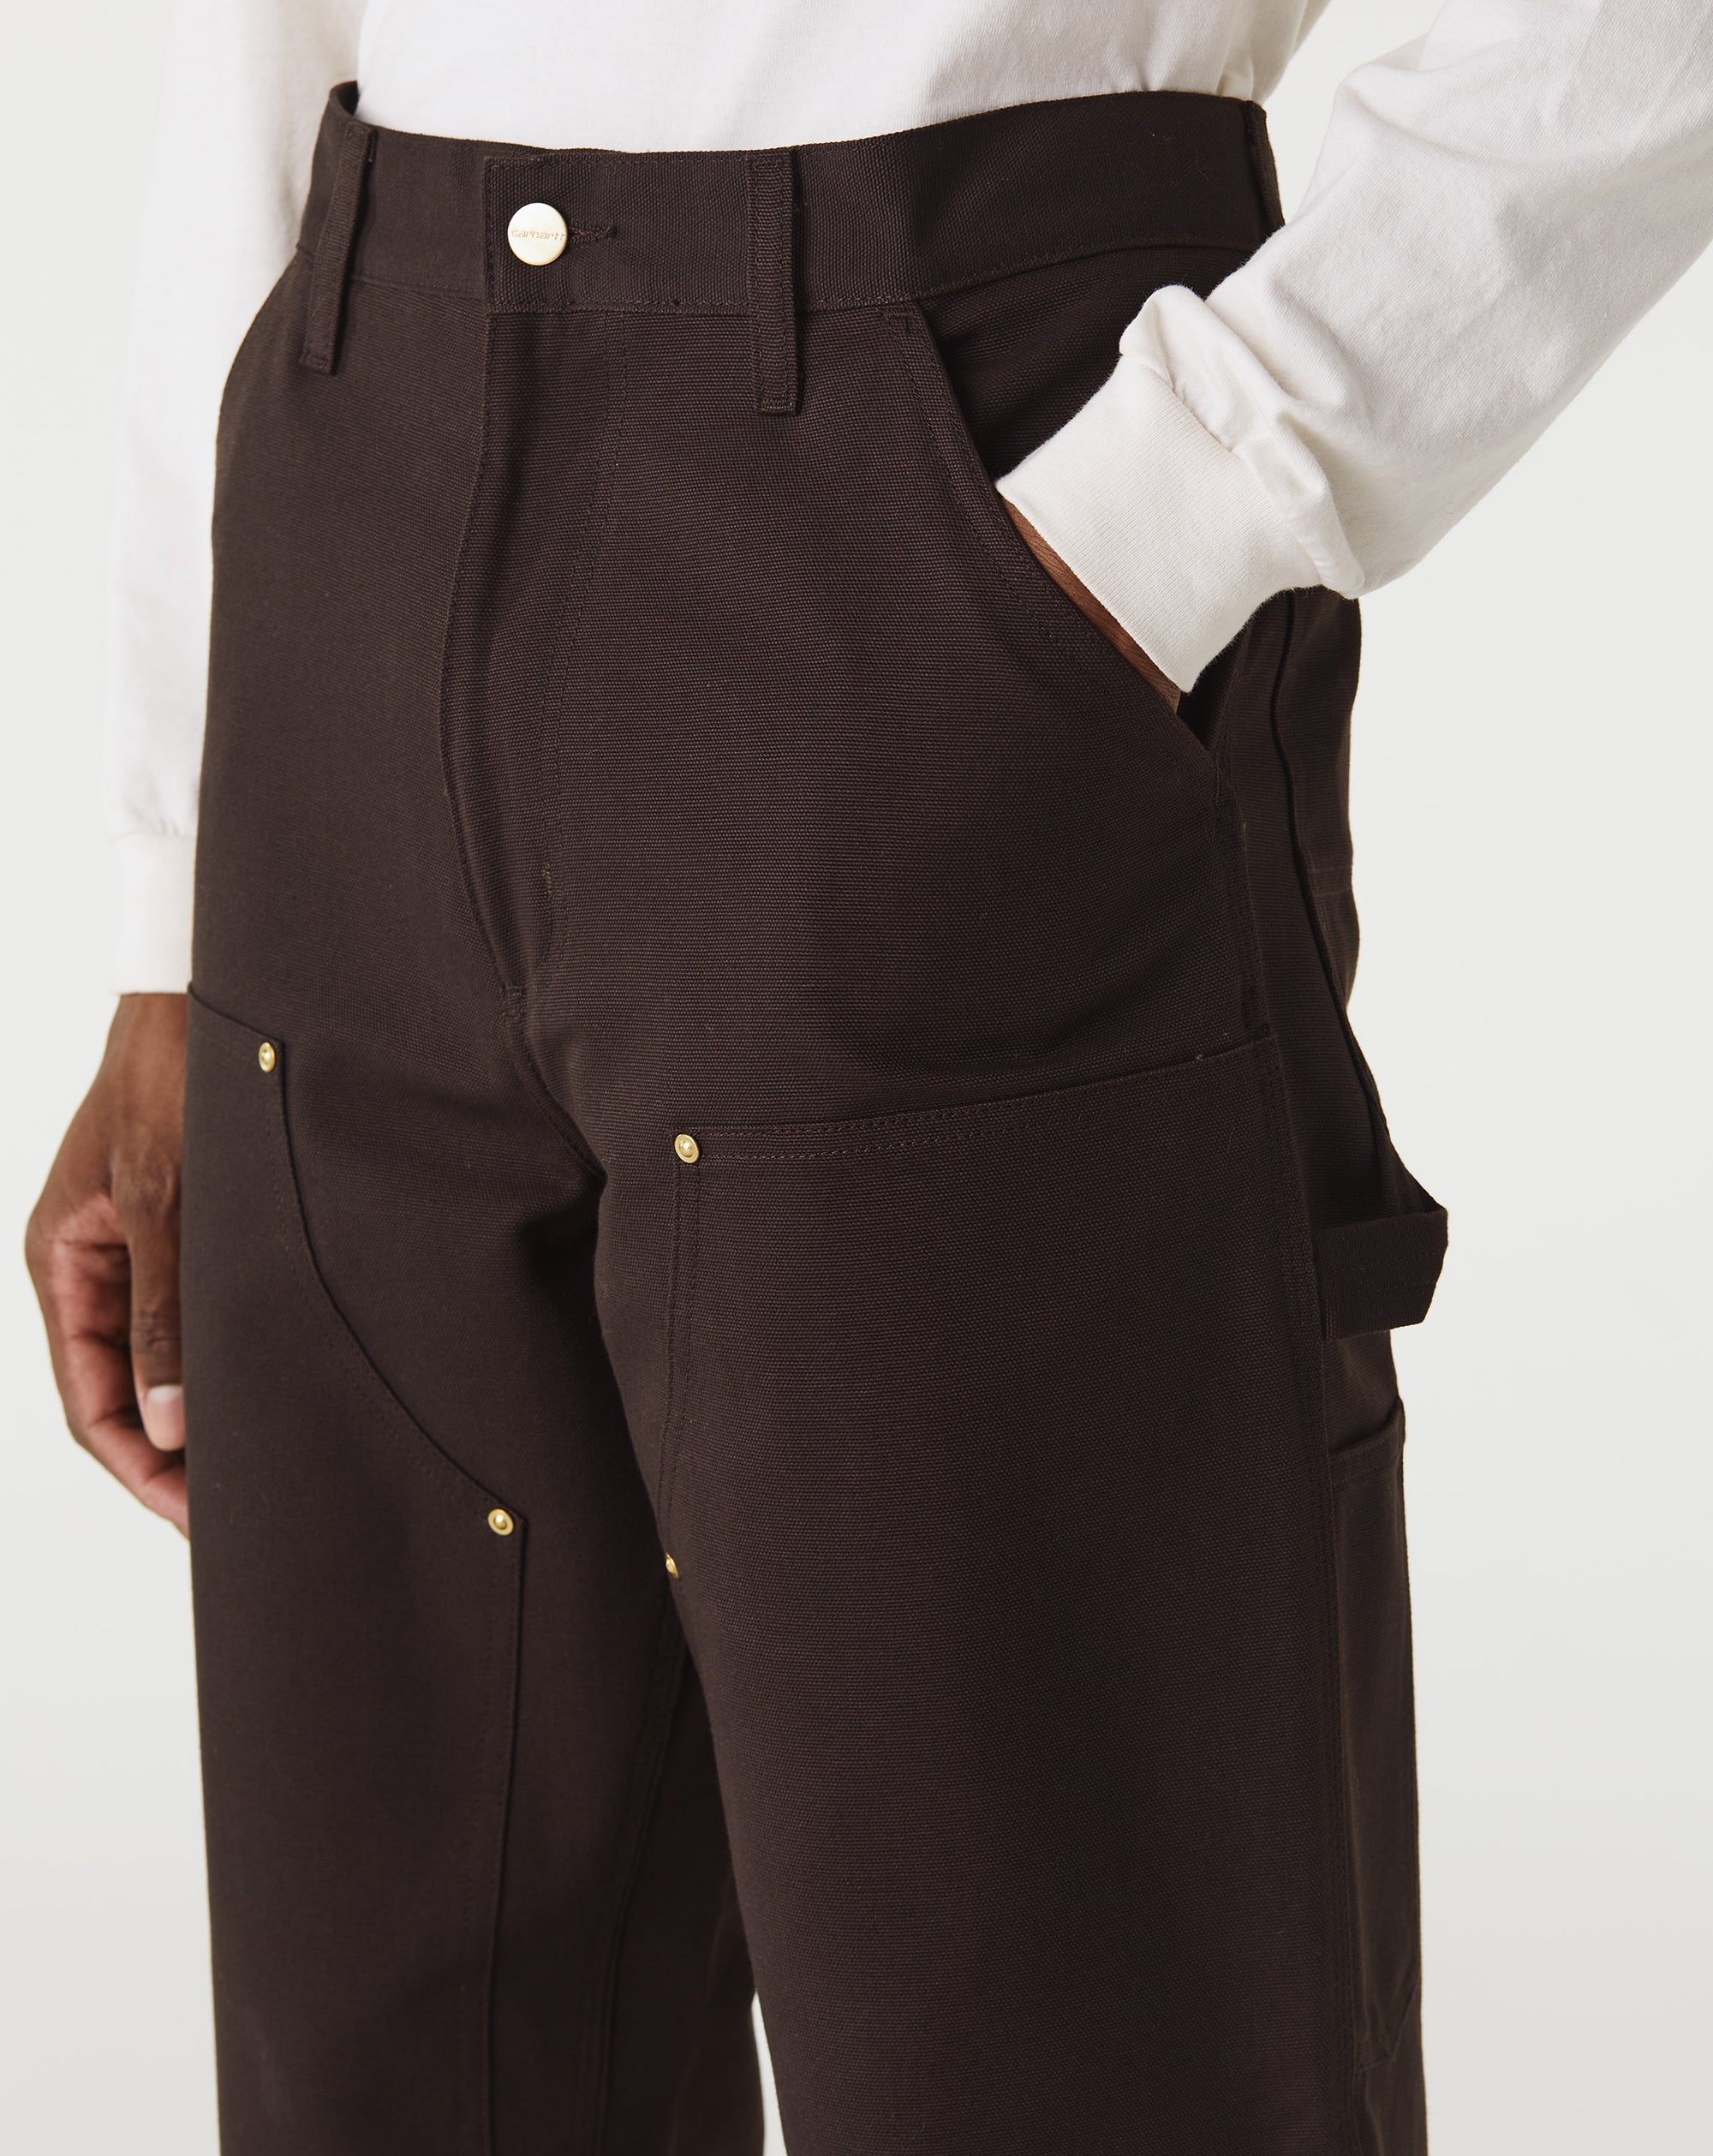 Carhartt Work In Progress - Double Knee Pant  HBX - Globally Curated  Fashion and Lifestyle by Hypebeast